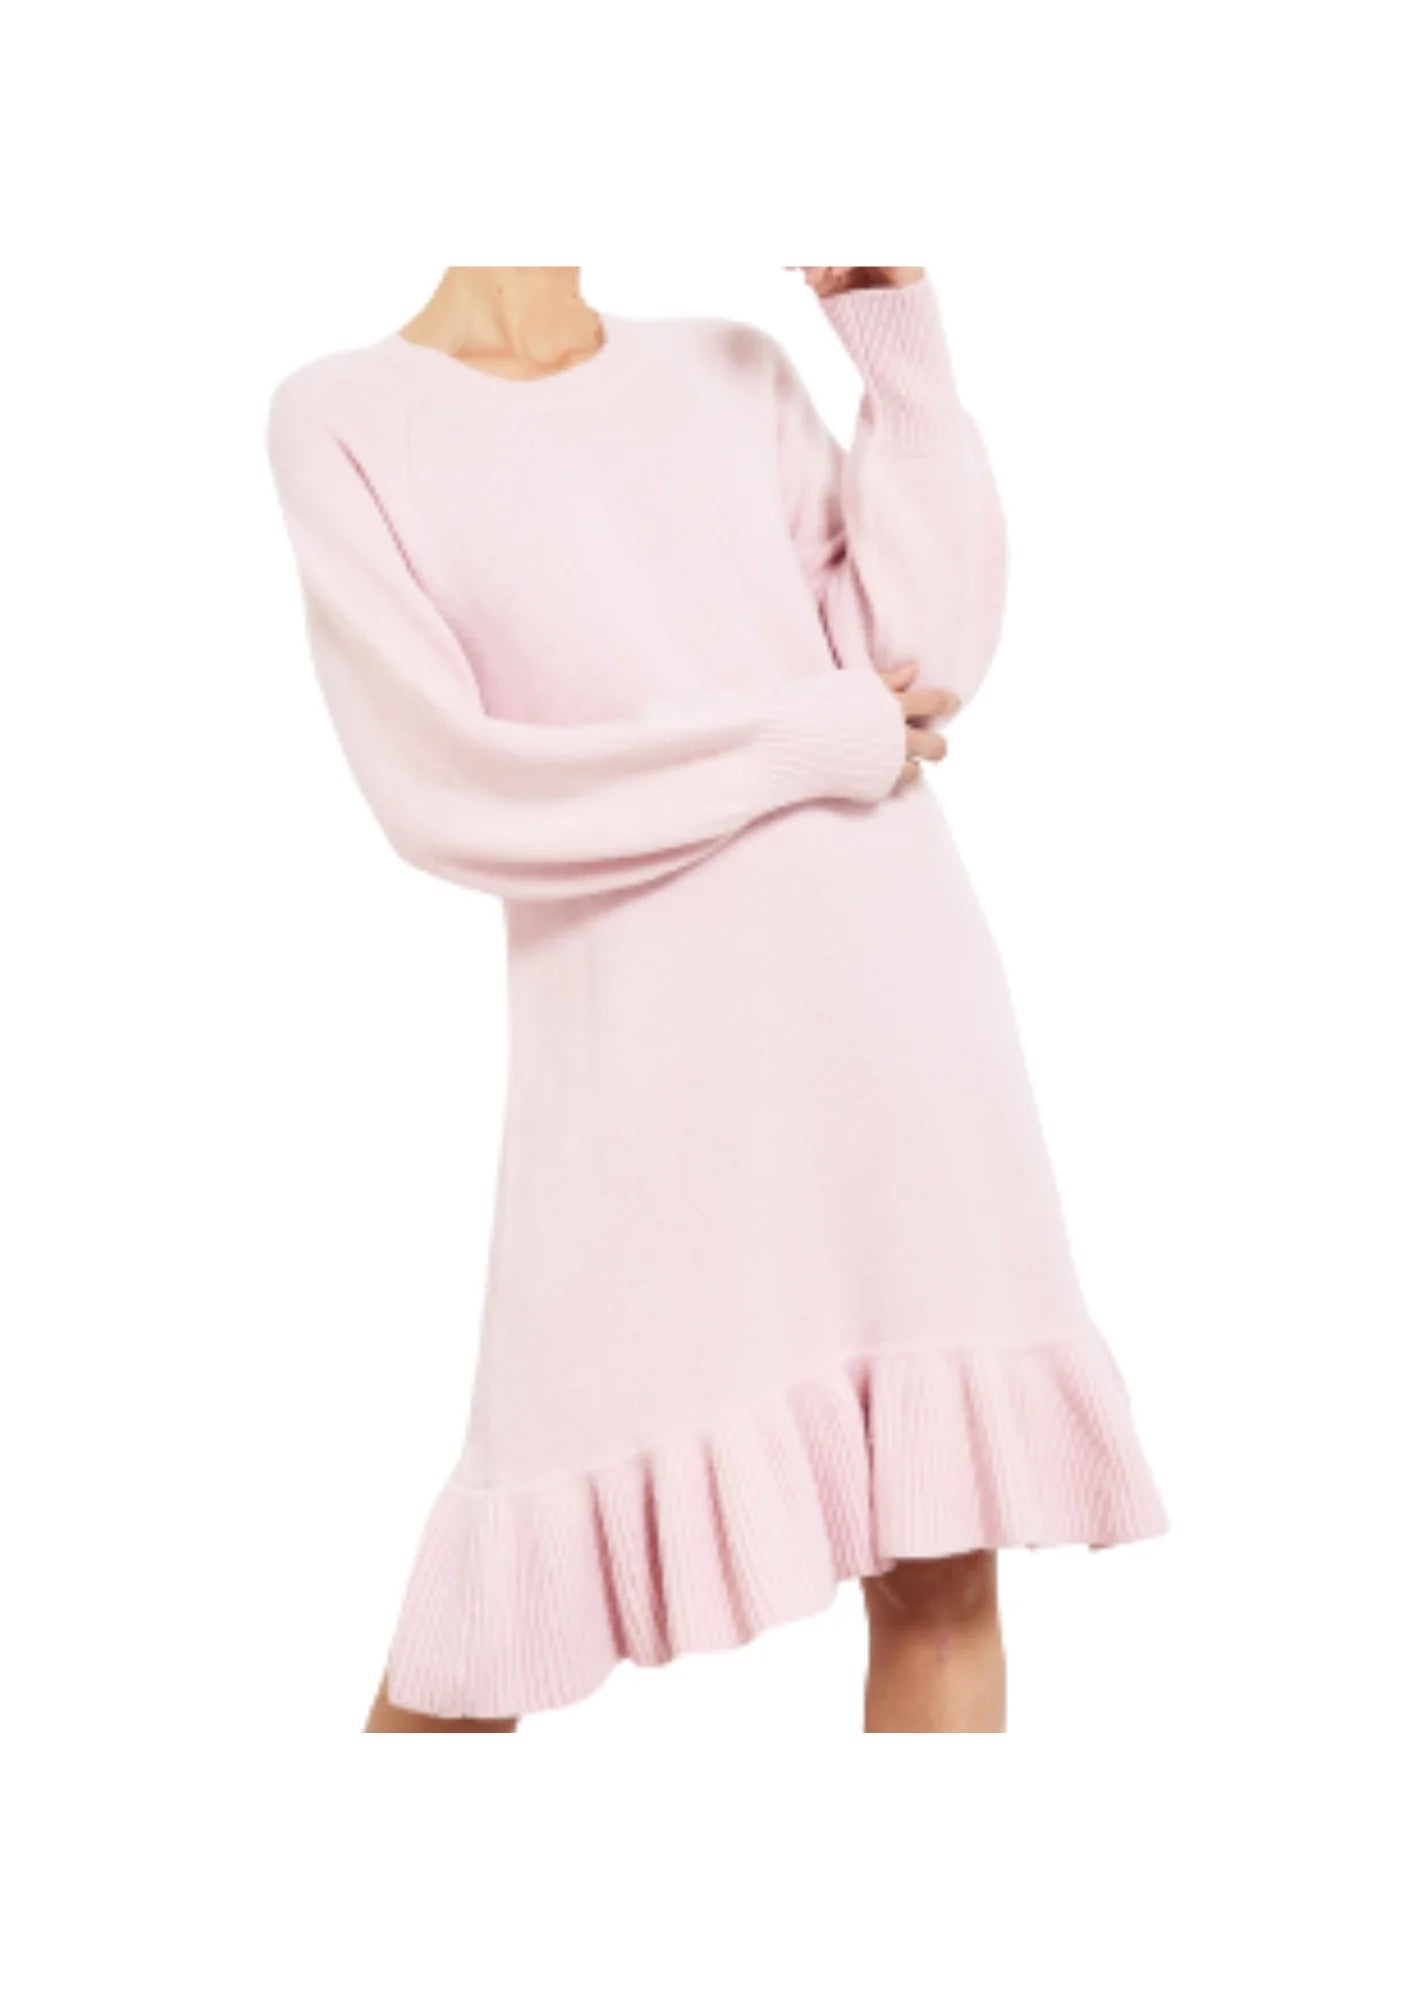 PINK KNITTED DRESS